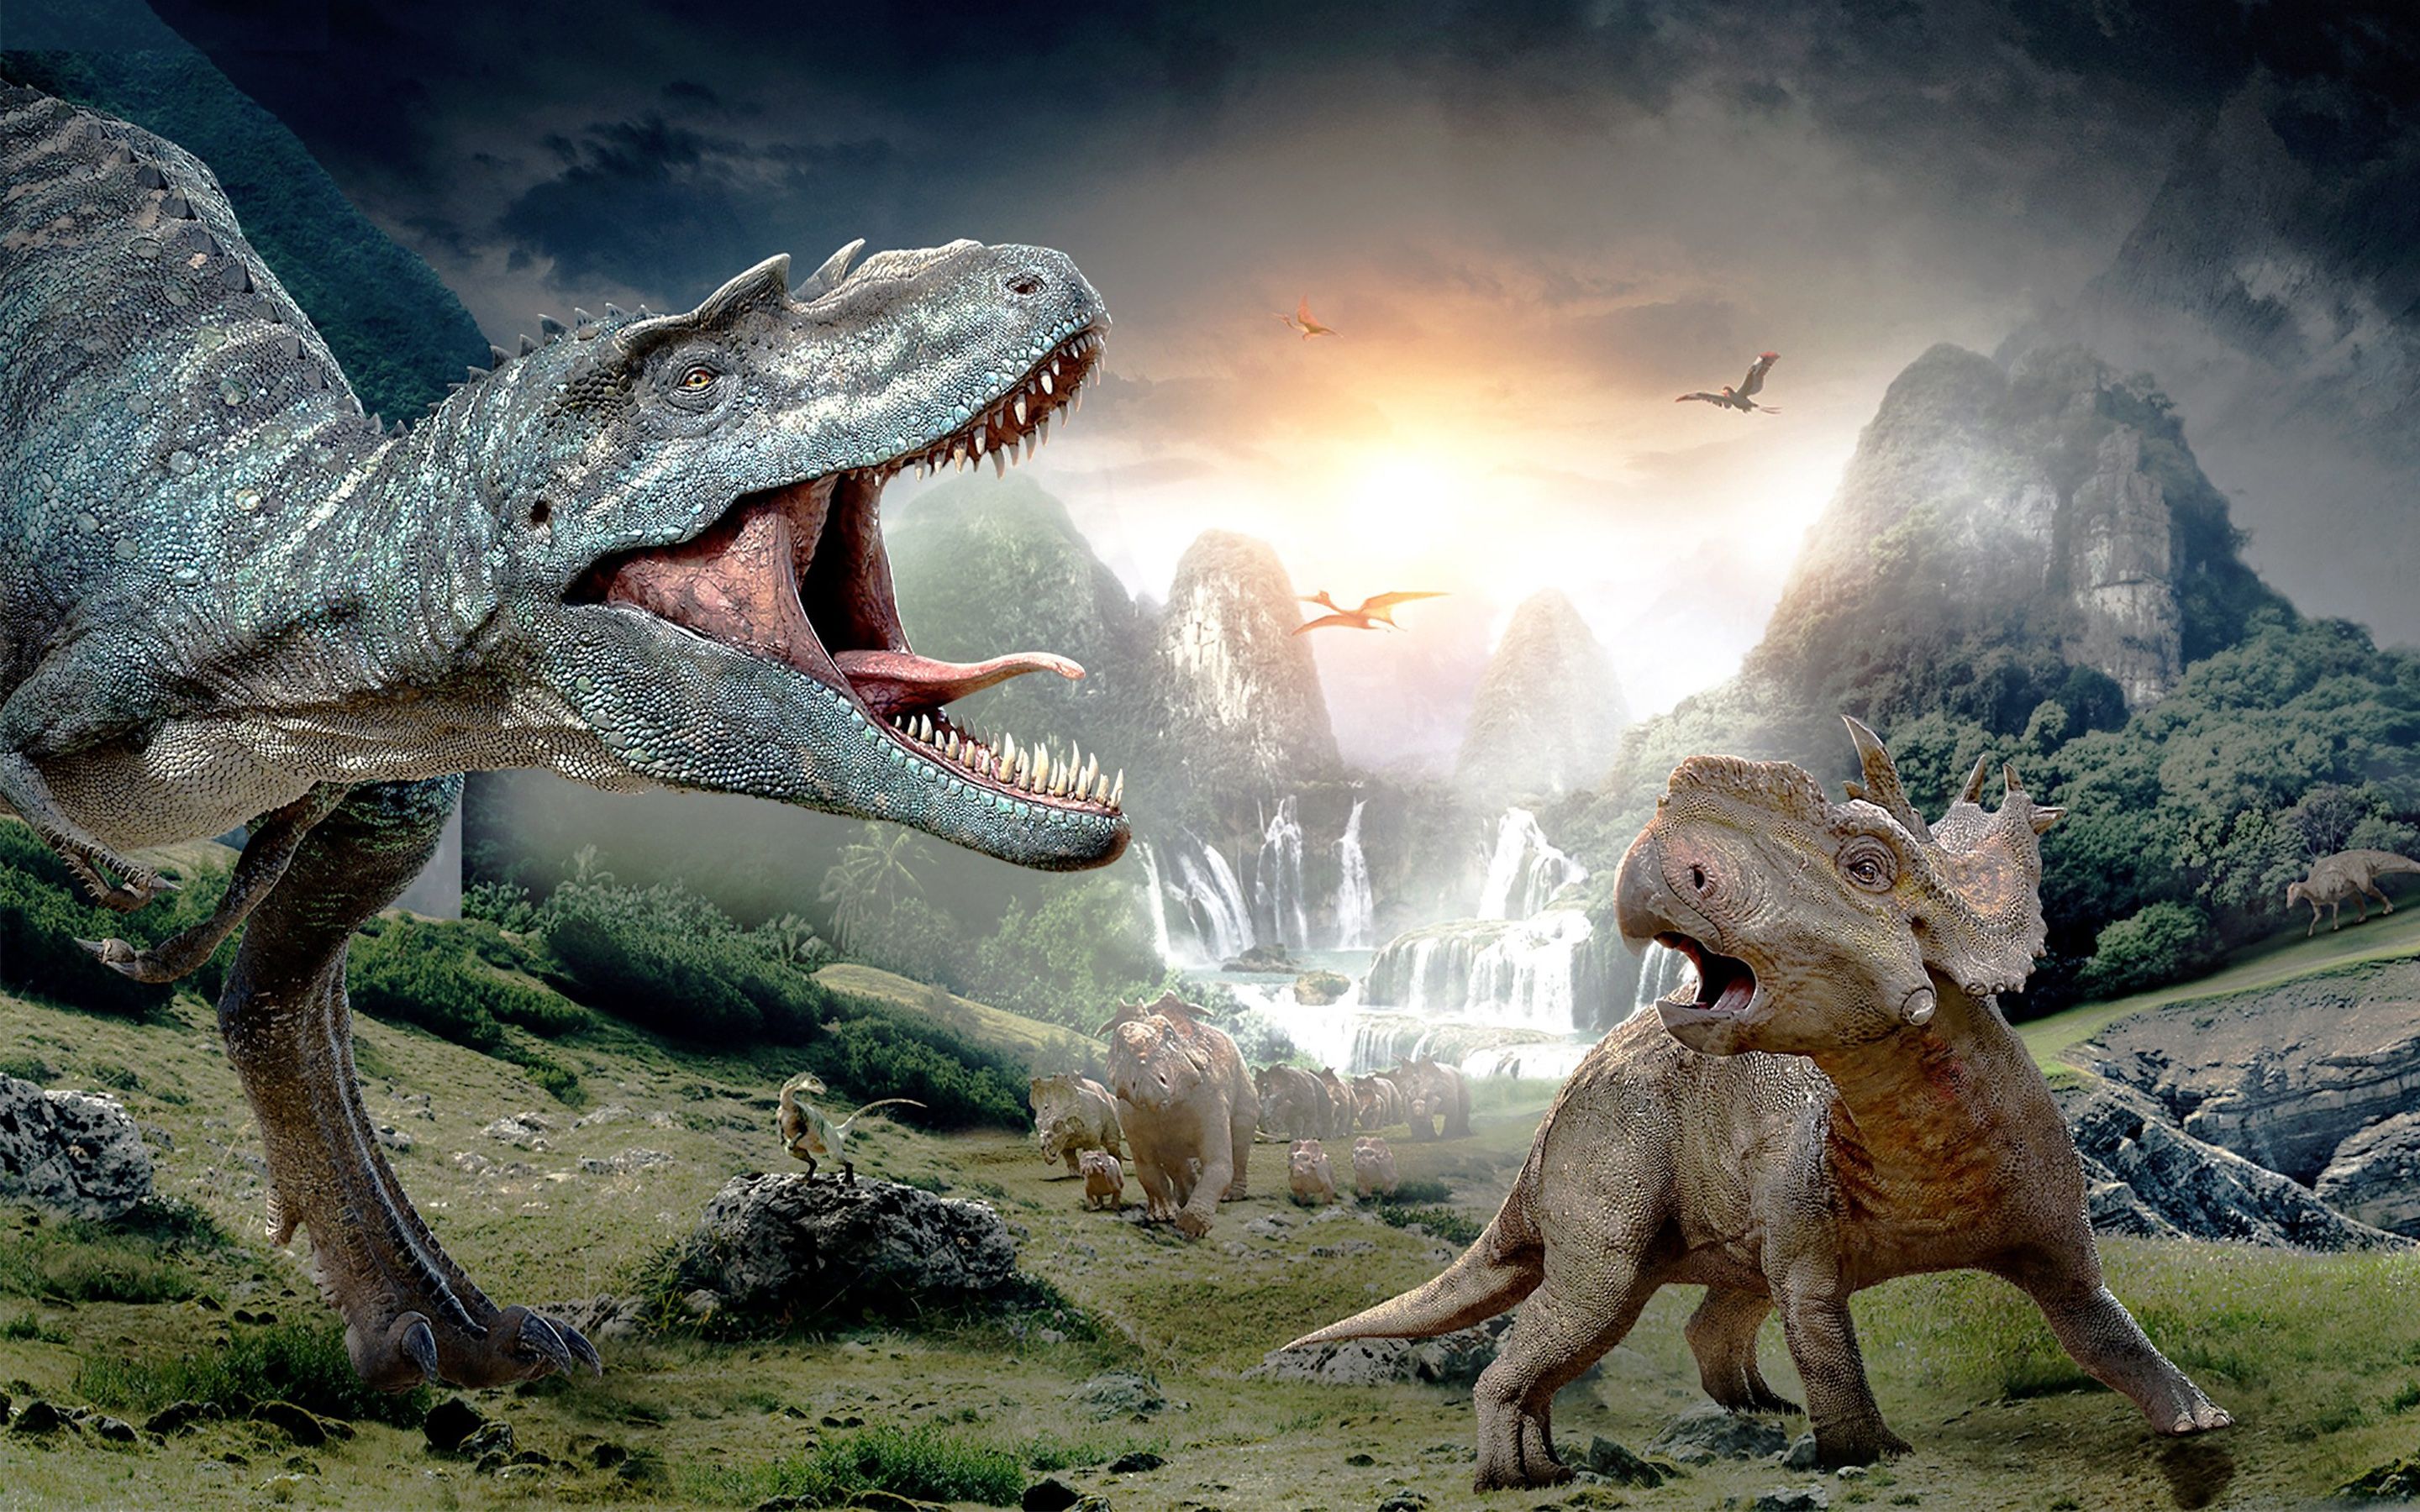 HD wallpaper, Walking, Movie, With, Dinosaurs